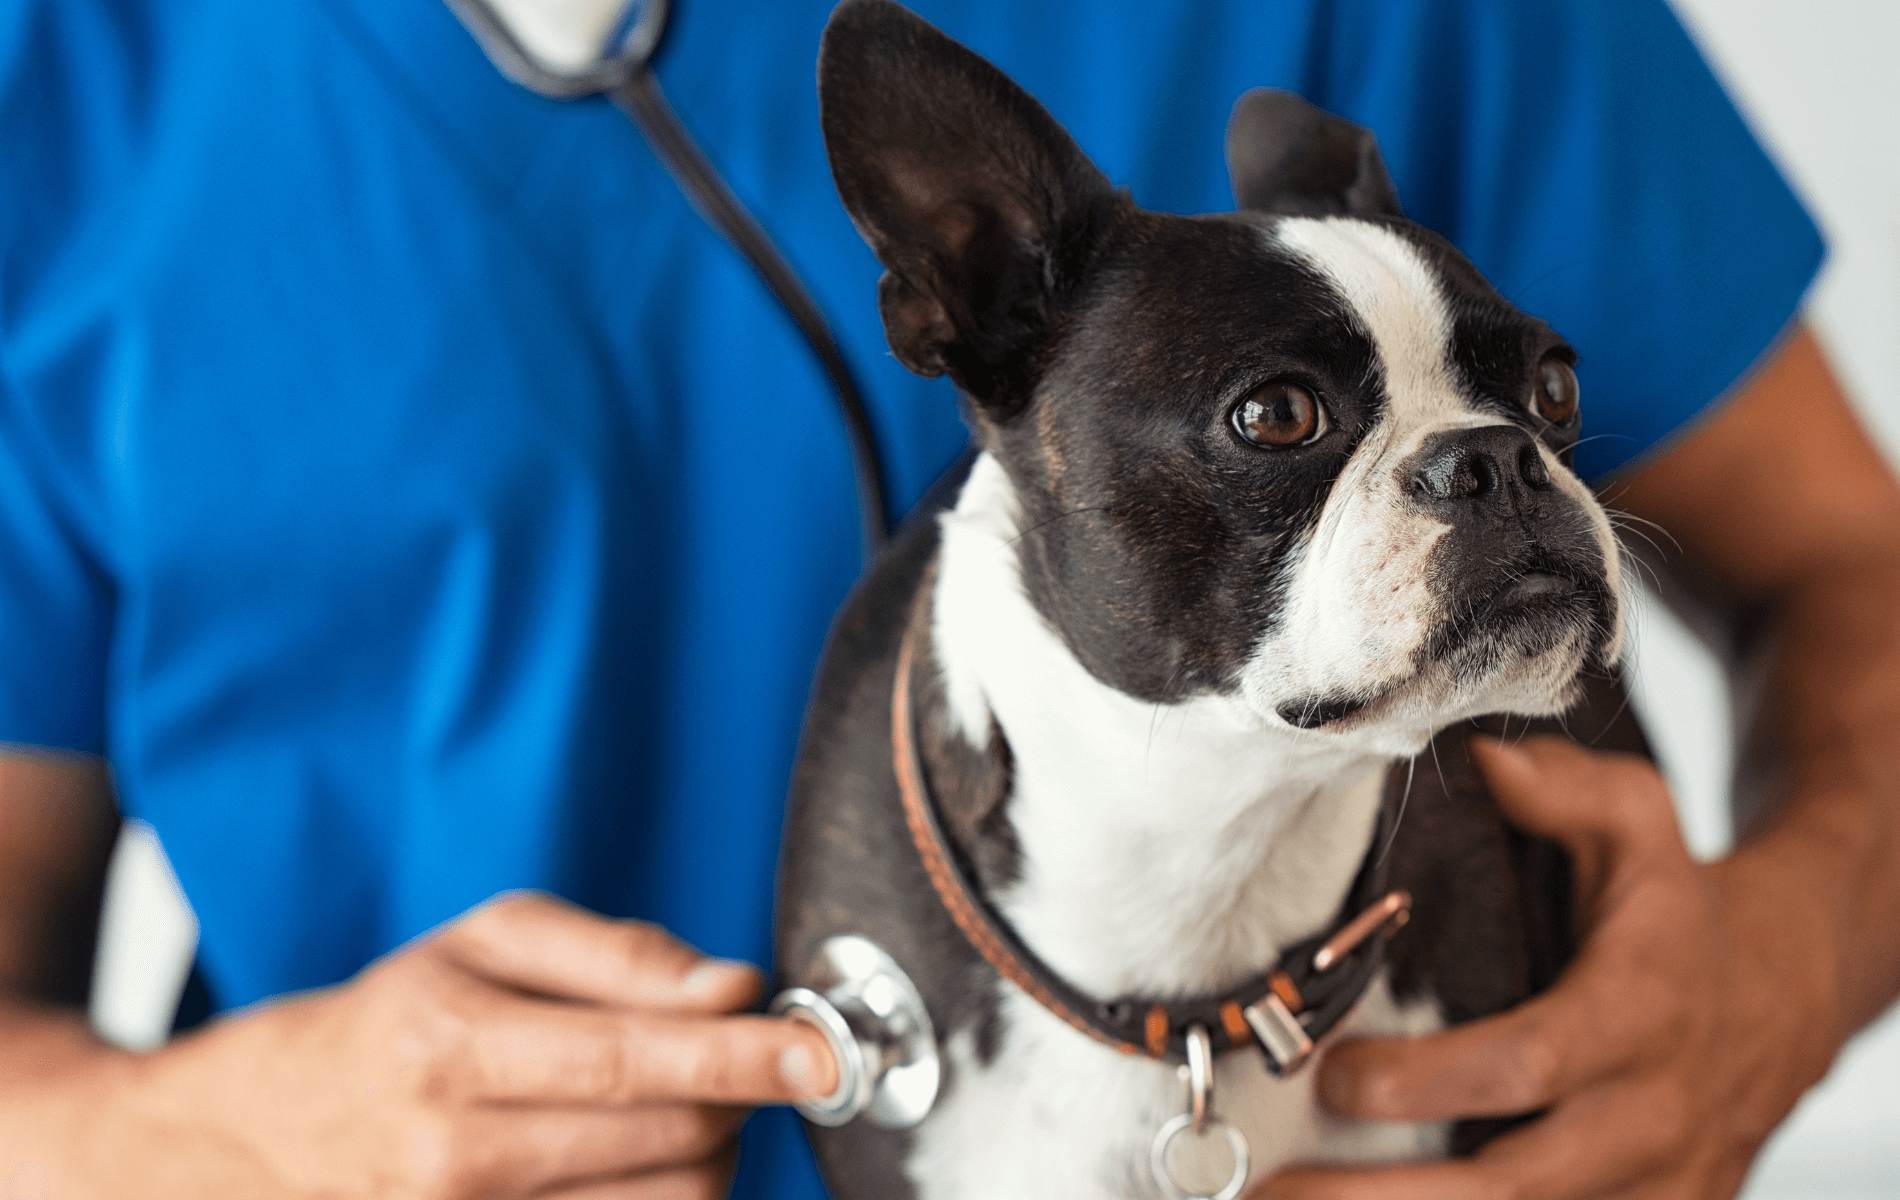 A dog with a stethoscope on its neck